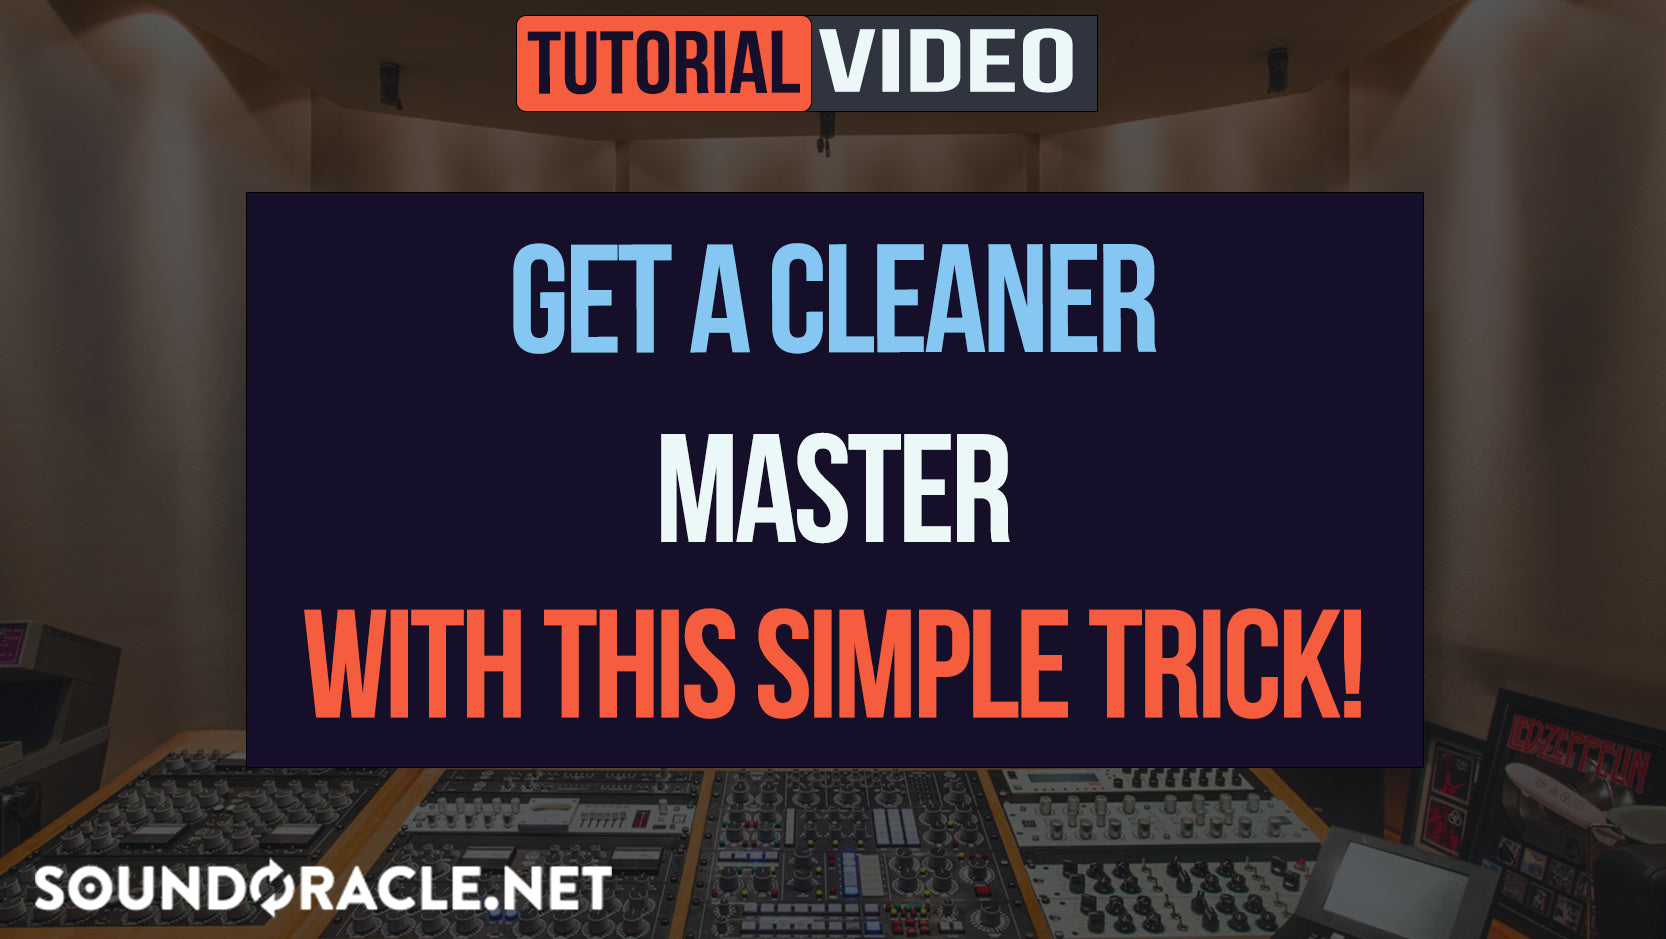 Get A Cleaner Master With This Simple Trick!